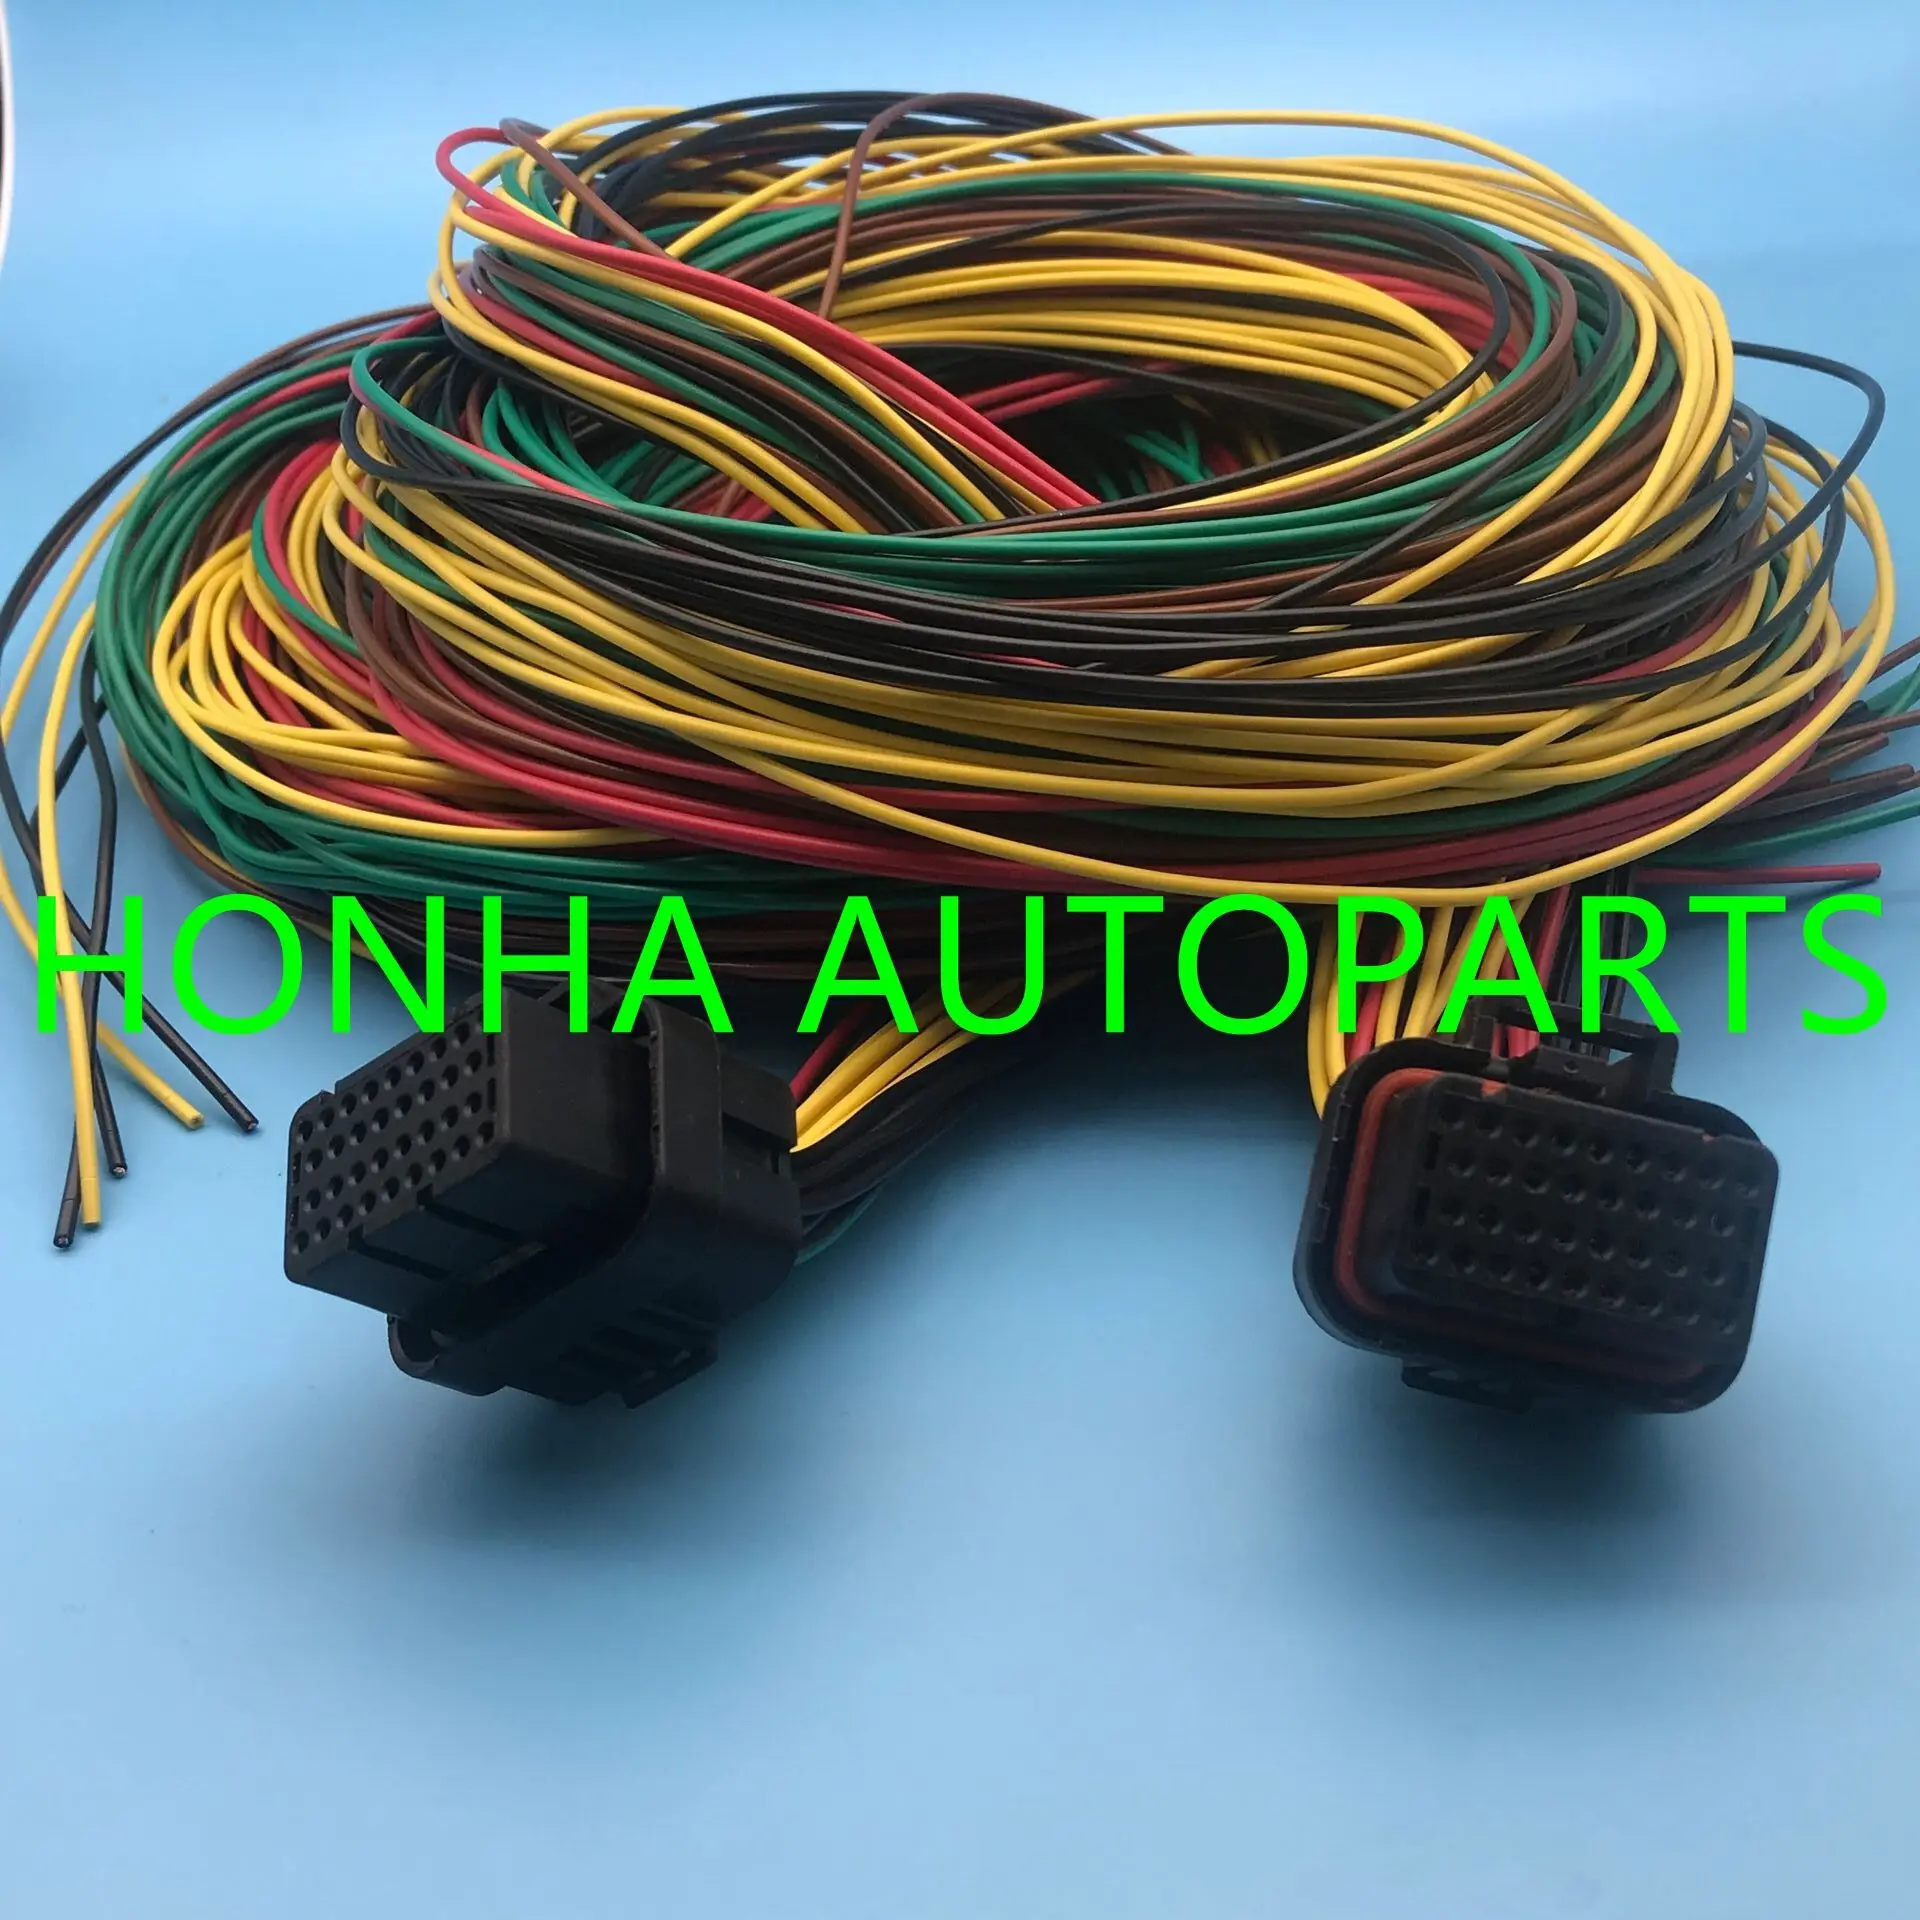 34 Pin/Way Female Tyco AMP Auto Oil Gas Connector Plug With 2 meter 18AWG Wire Pigtail 4-1437290-0  4-1437290-1